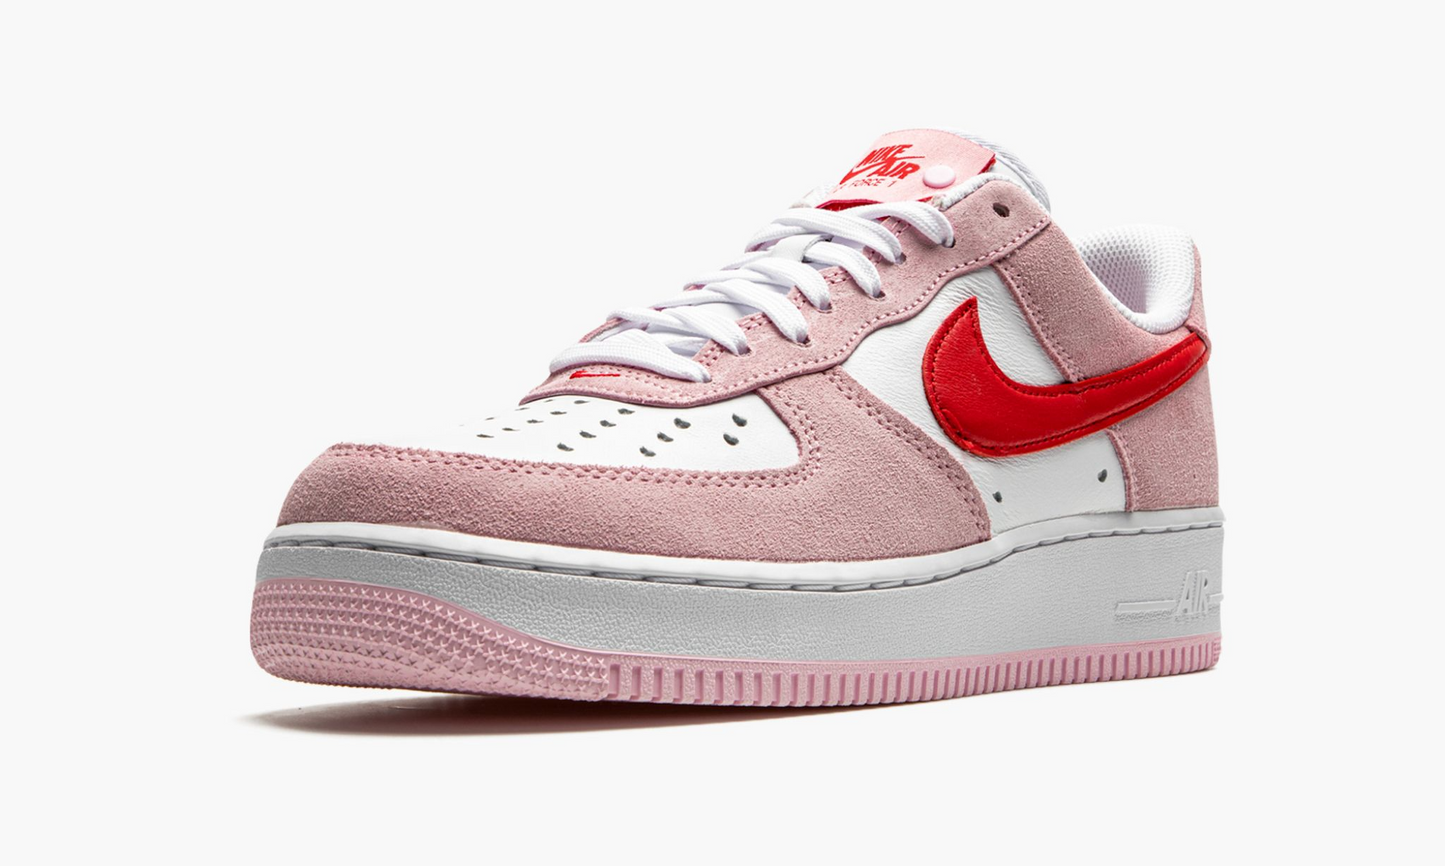 Air Force 1 Low Valentine's Day Love Letter - DD3384 600 